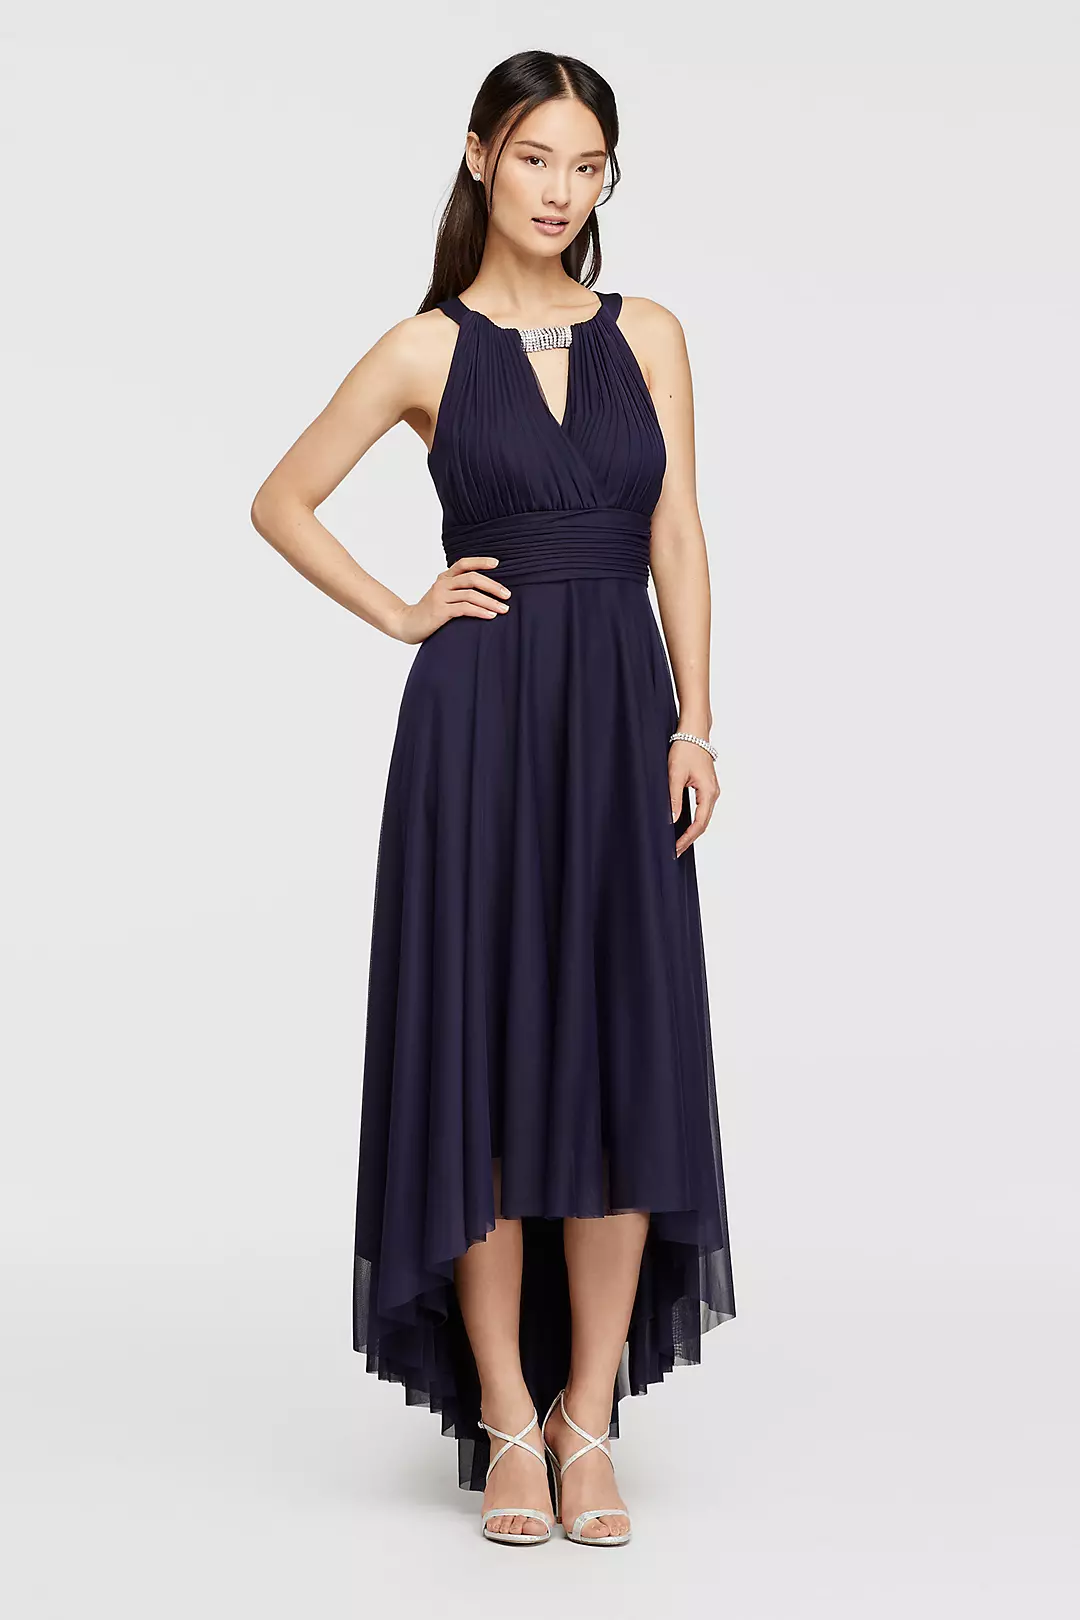 High Low Jersey Dress with Keyhole Bodice Image